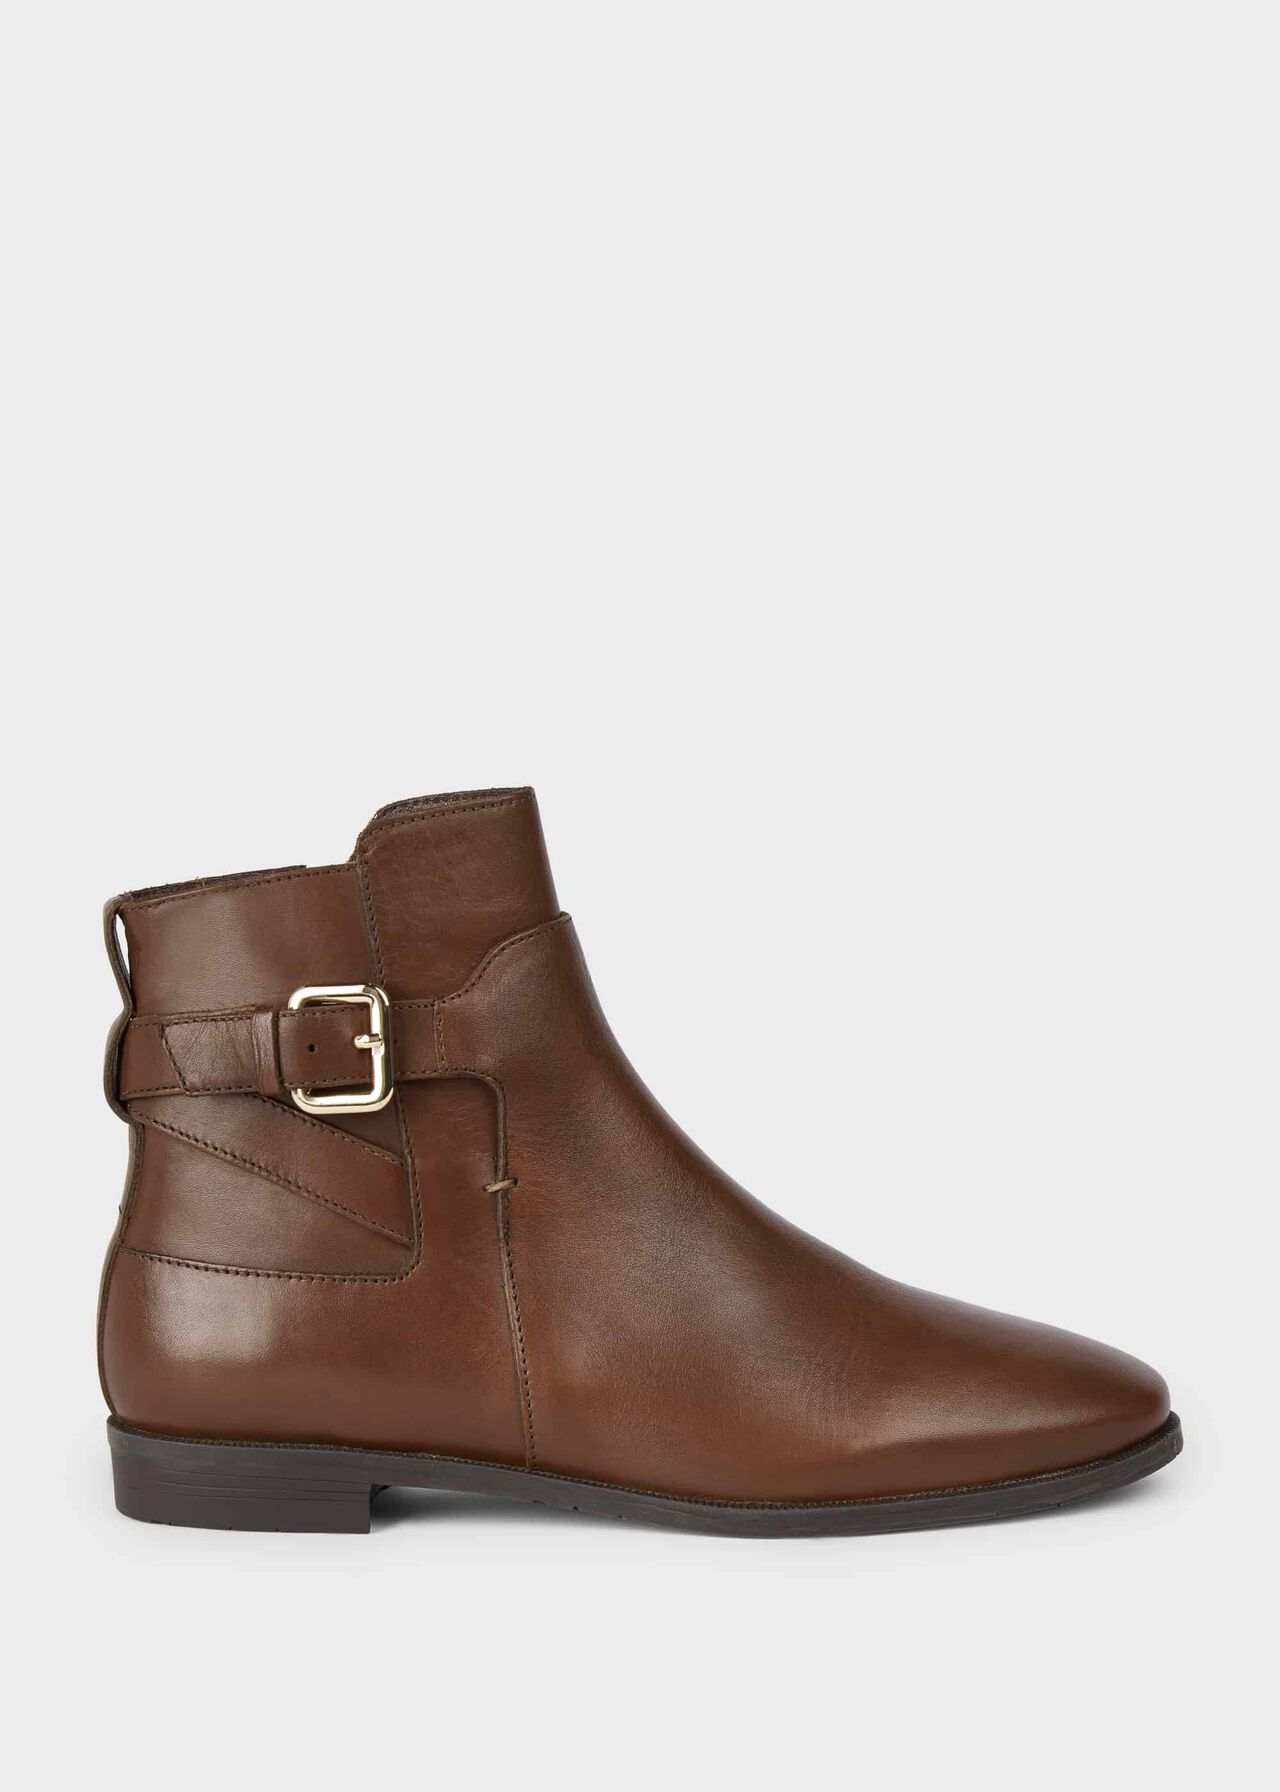 Zoe Ankle Boots, Chestnut, hi-res